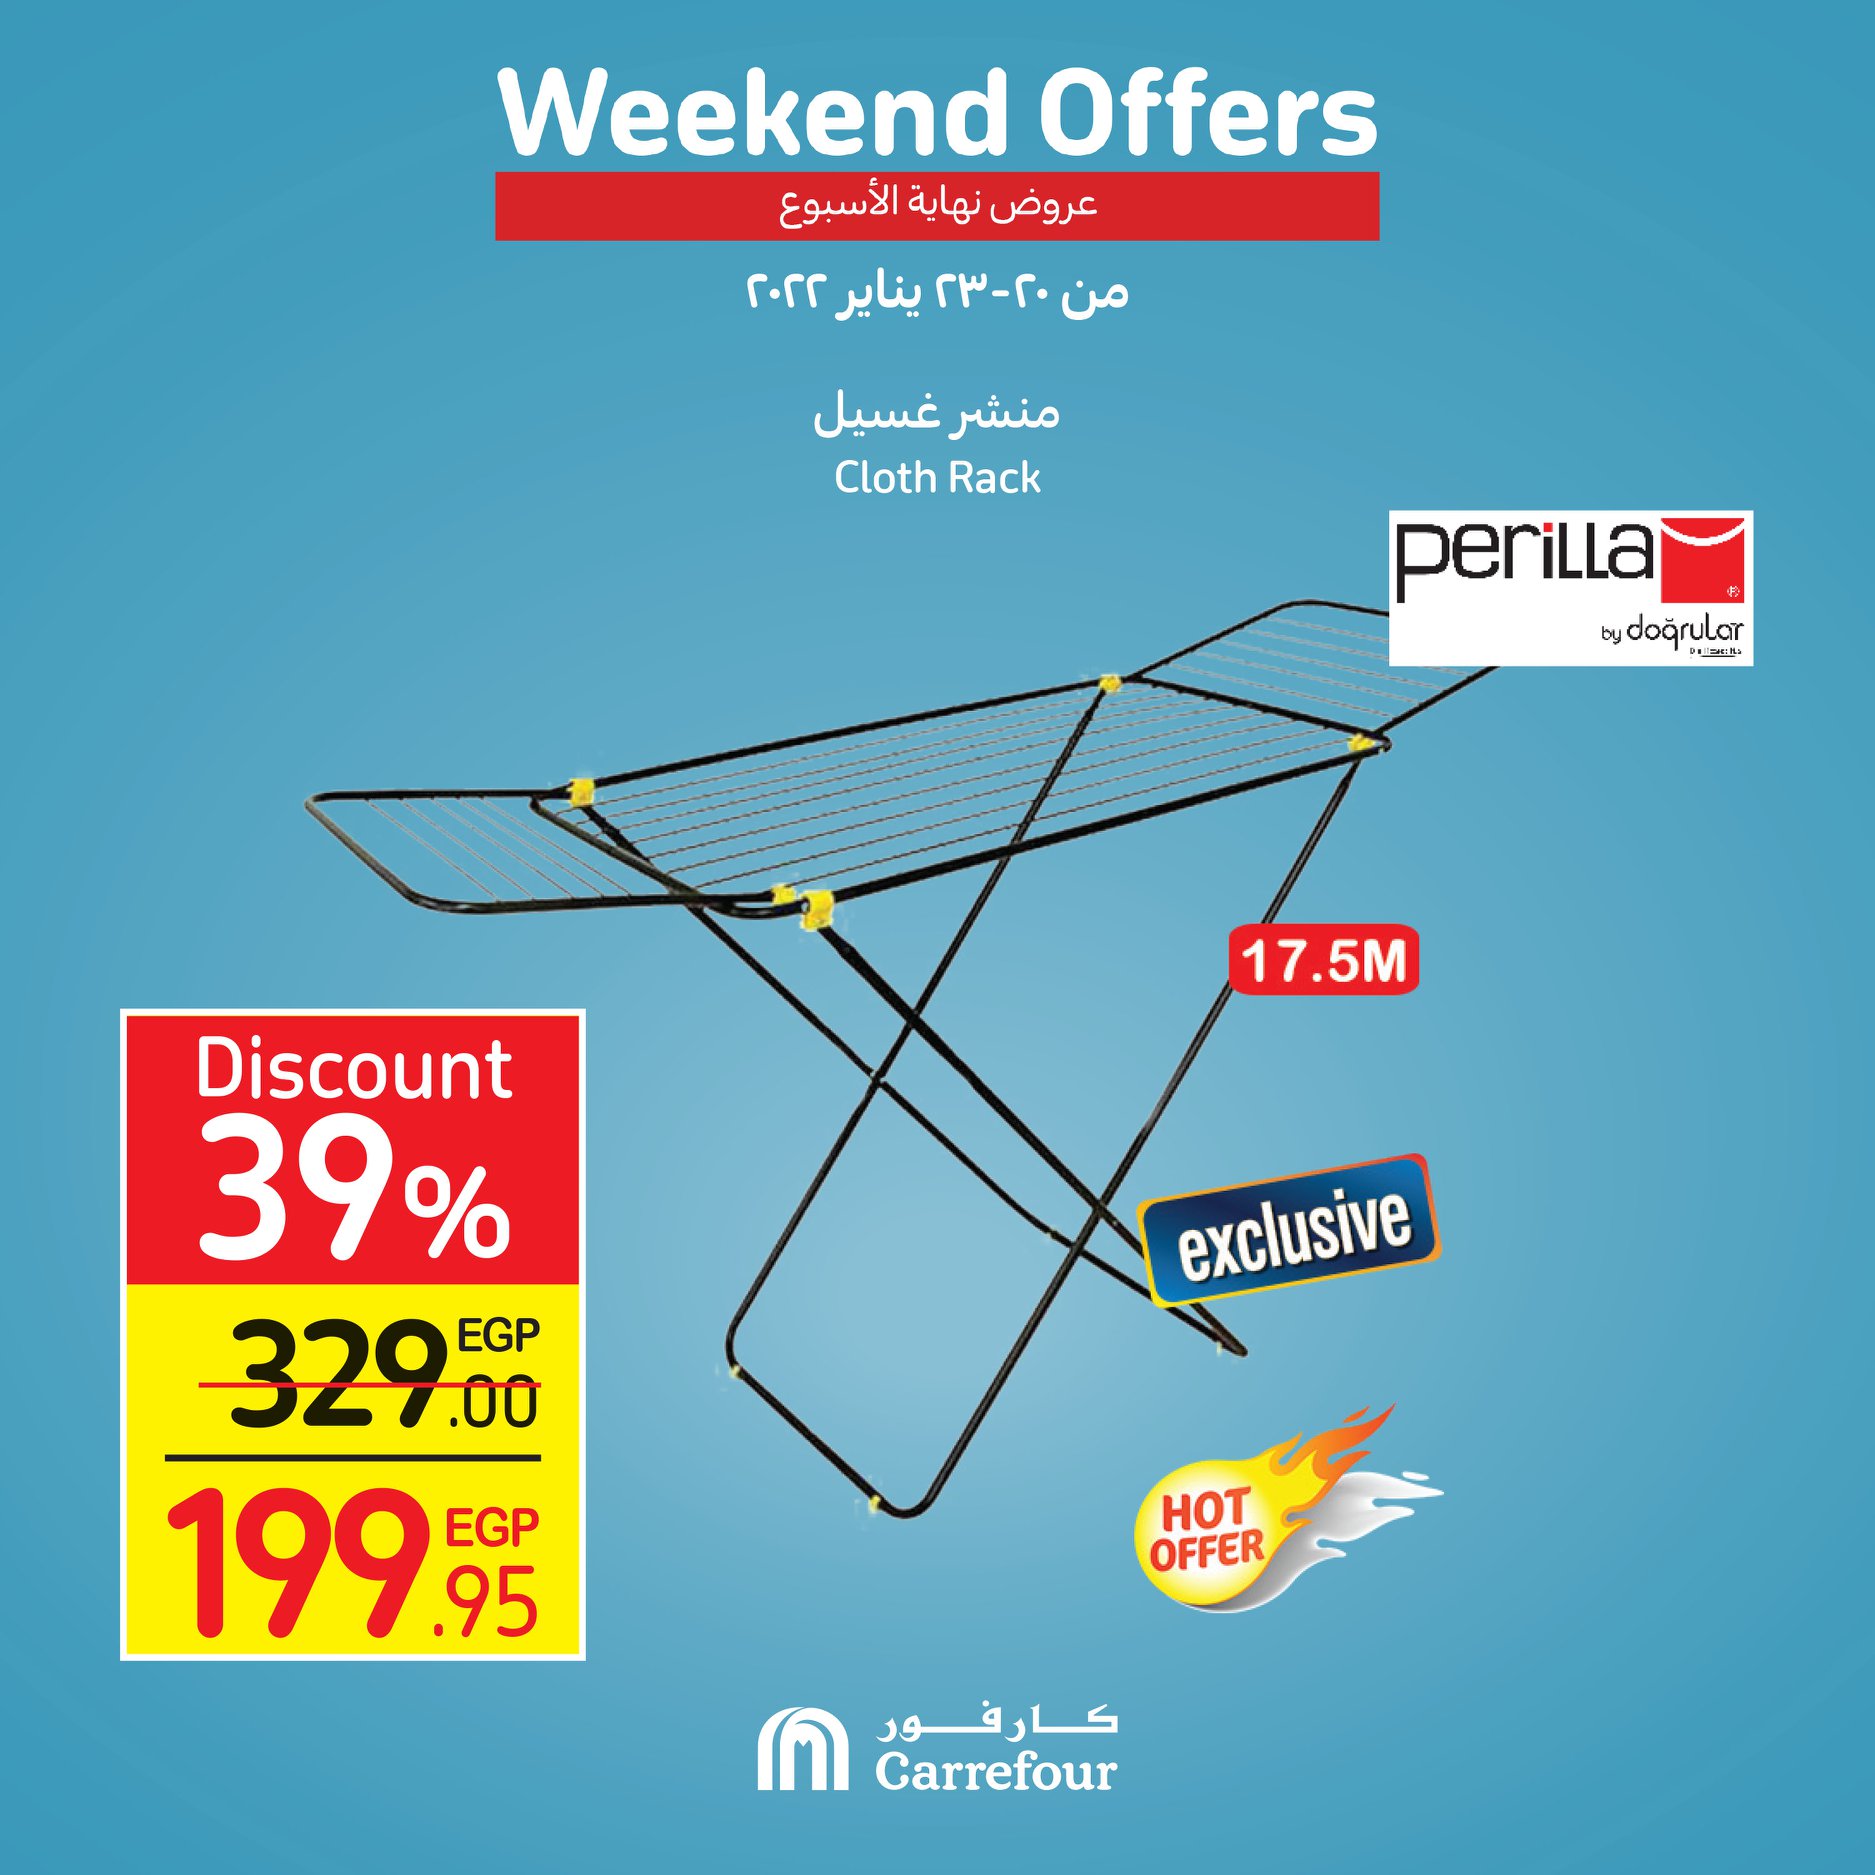 Watch Carrefour's gifts and surprises at Weekend and dirt cheap prices 28